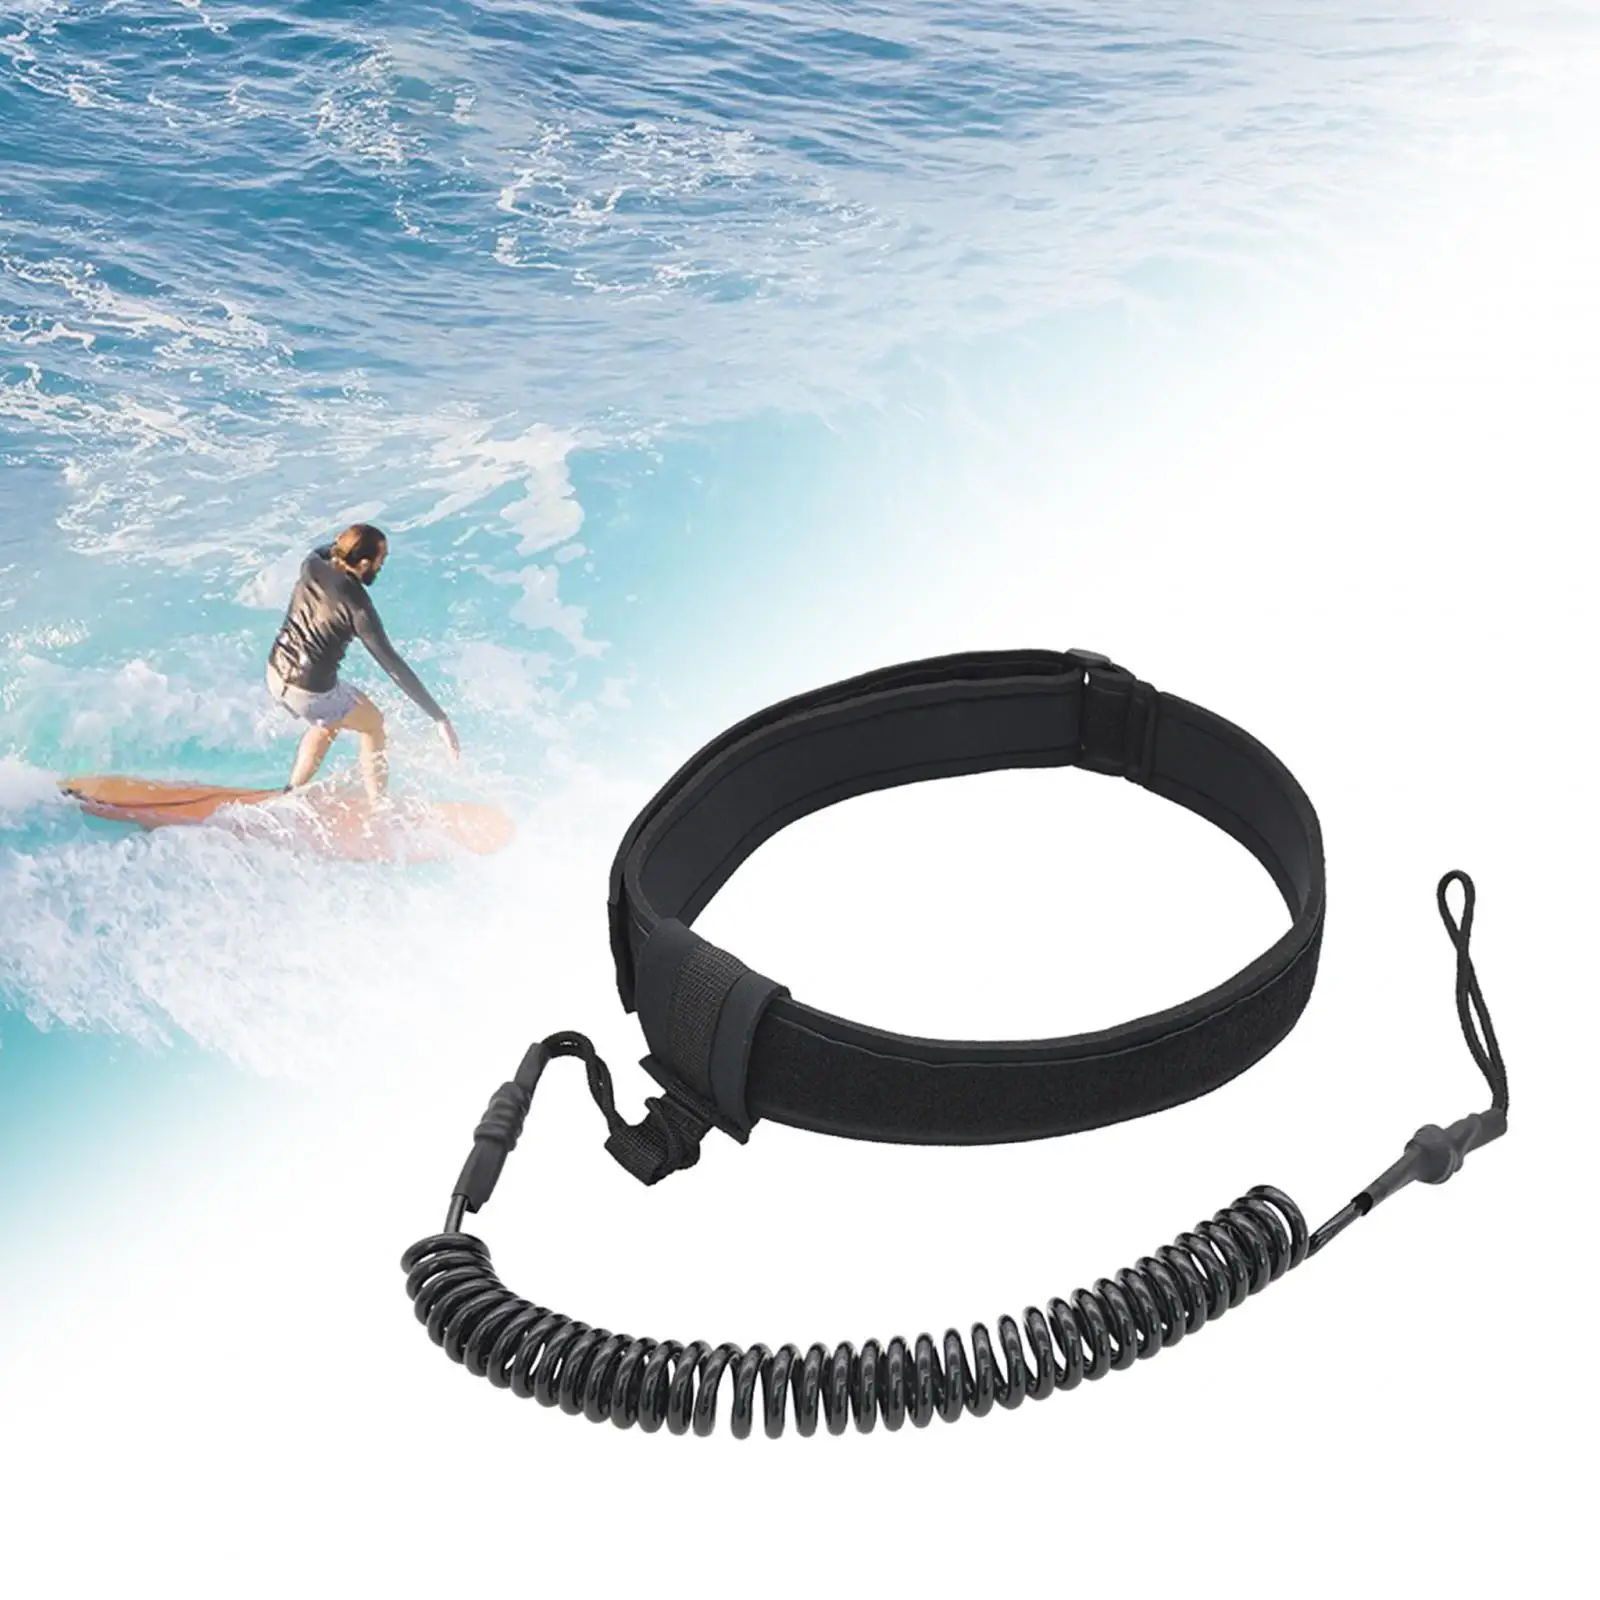 Surfboard Leash Safety Leash for Longboard Stand up Paddleboards Surfing